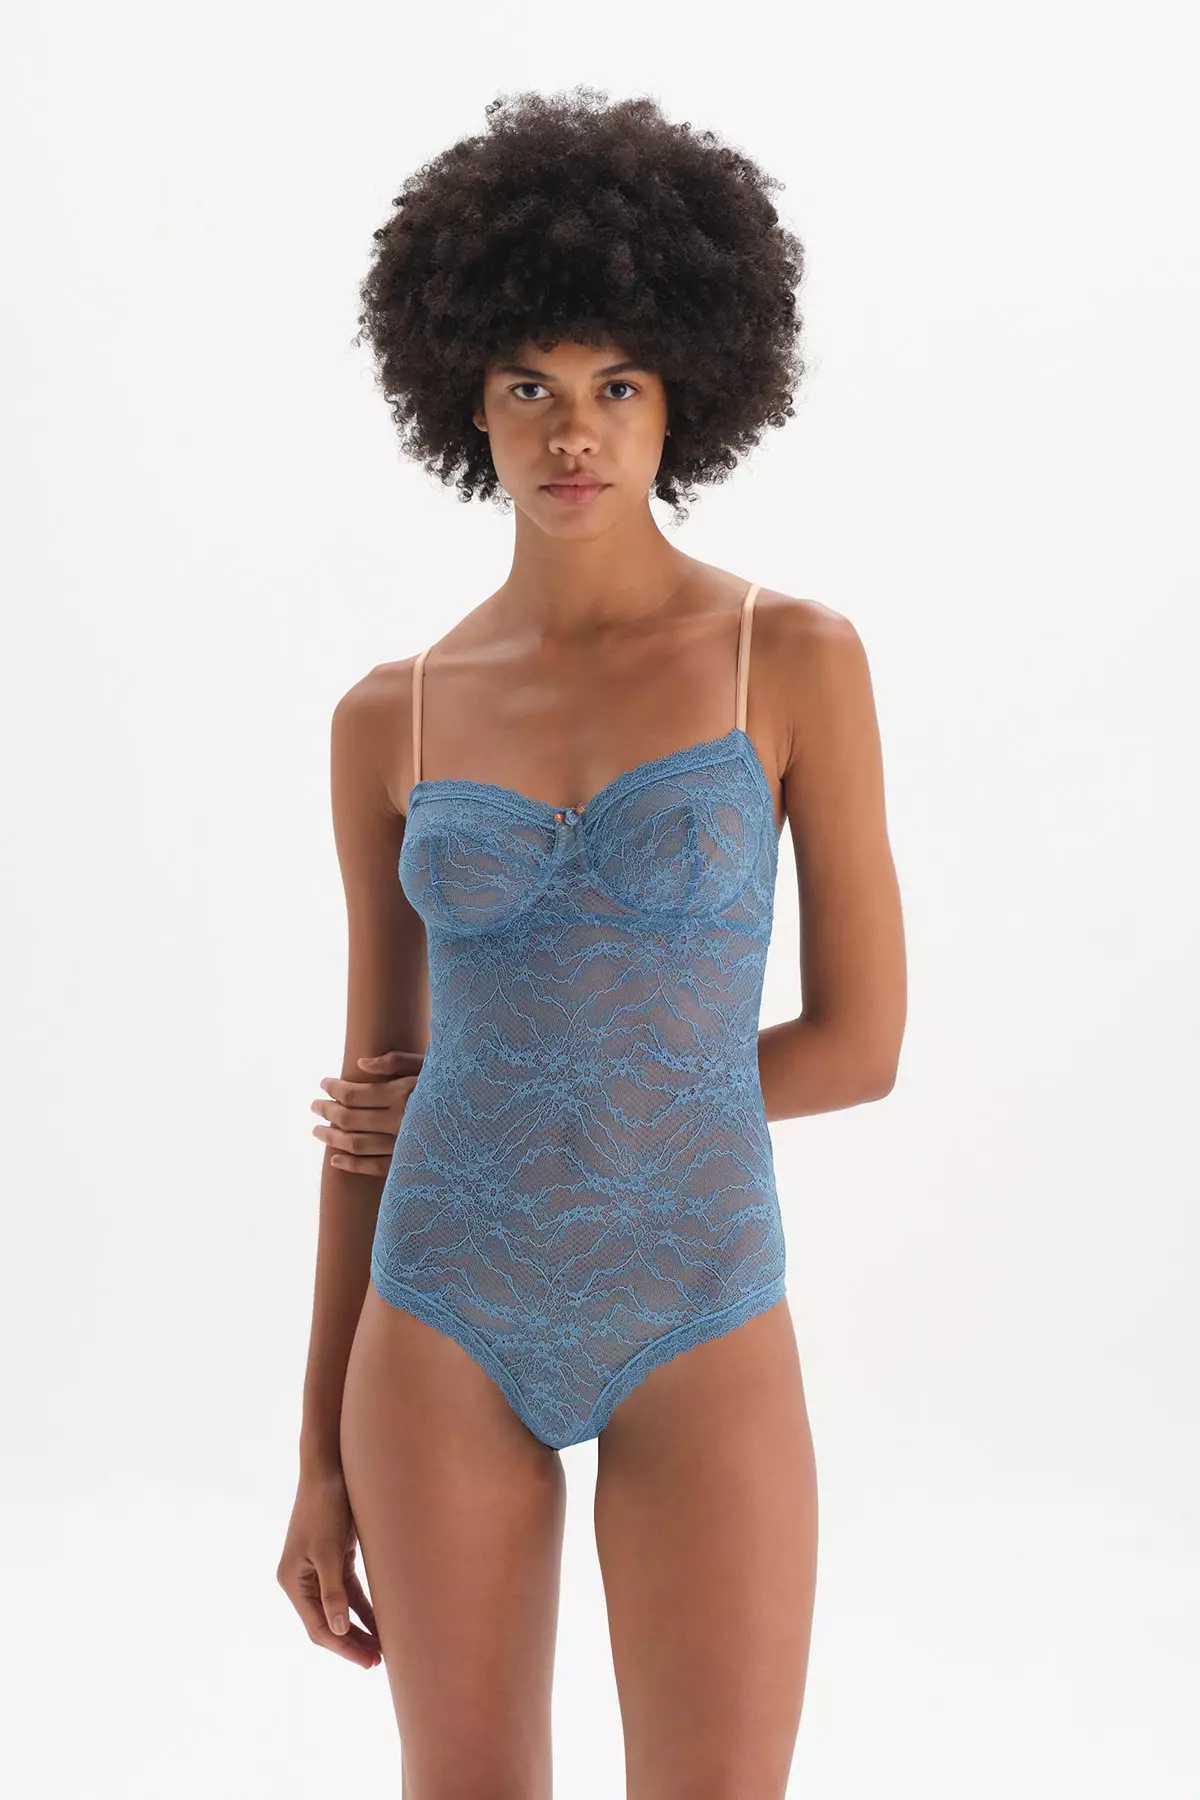 FLOWERY LACE BODYSUIT THONG